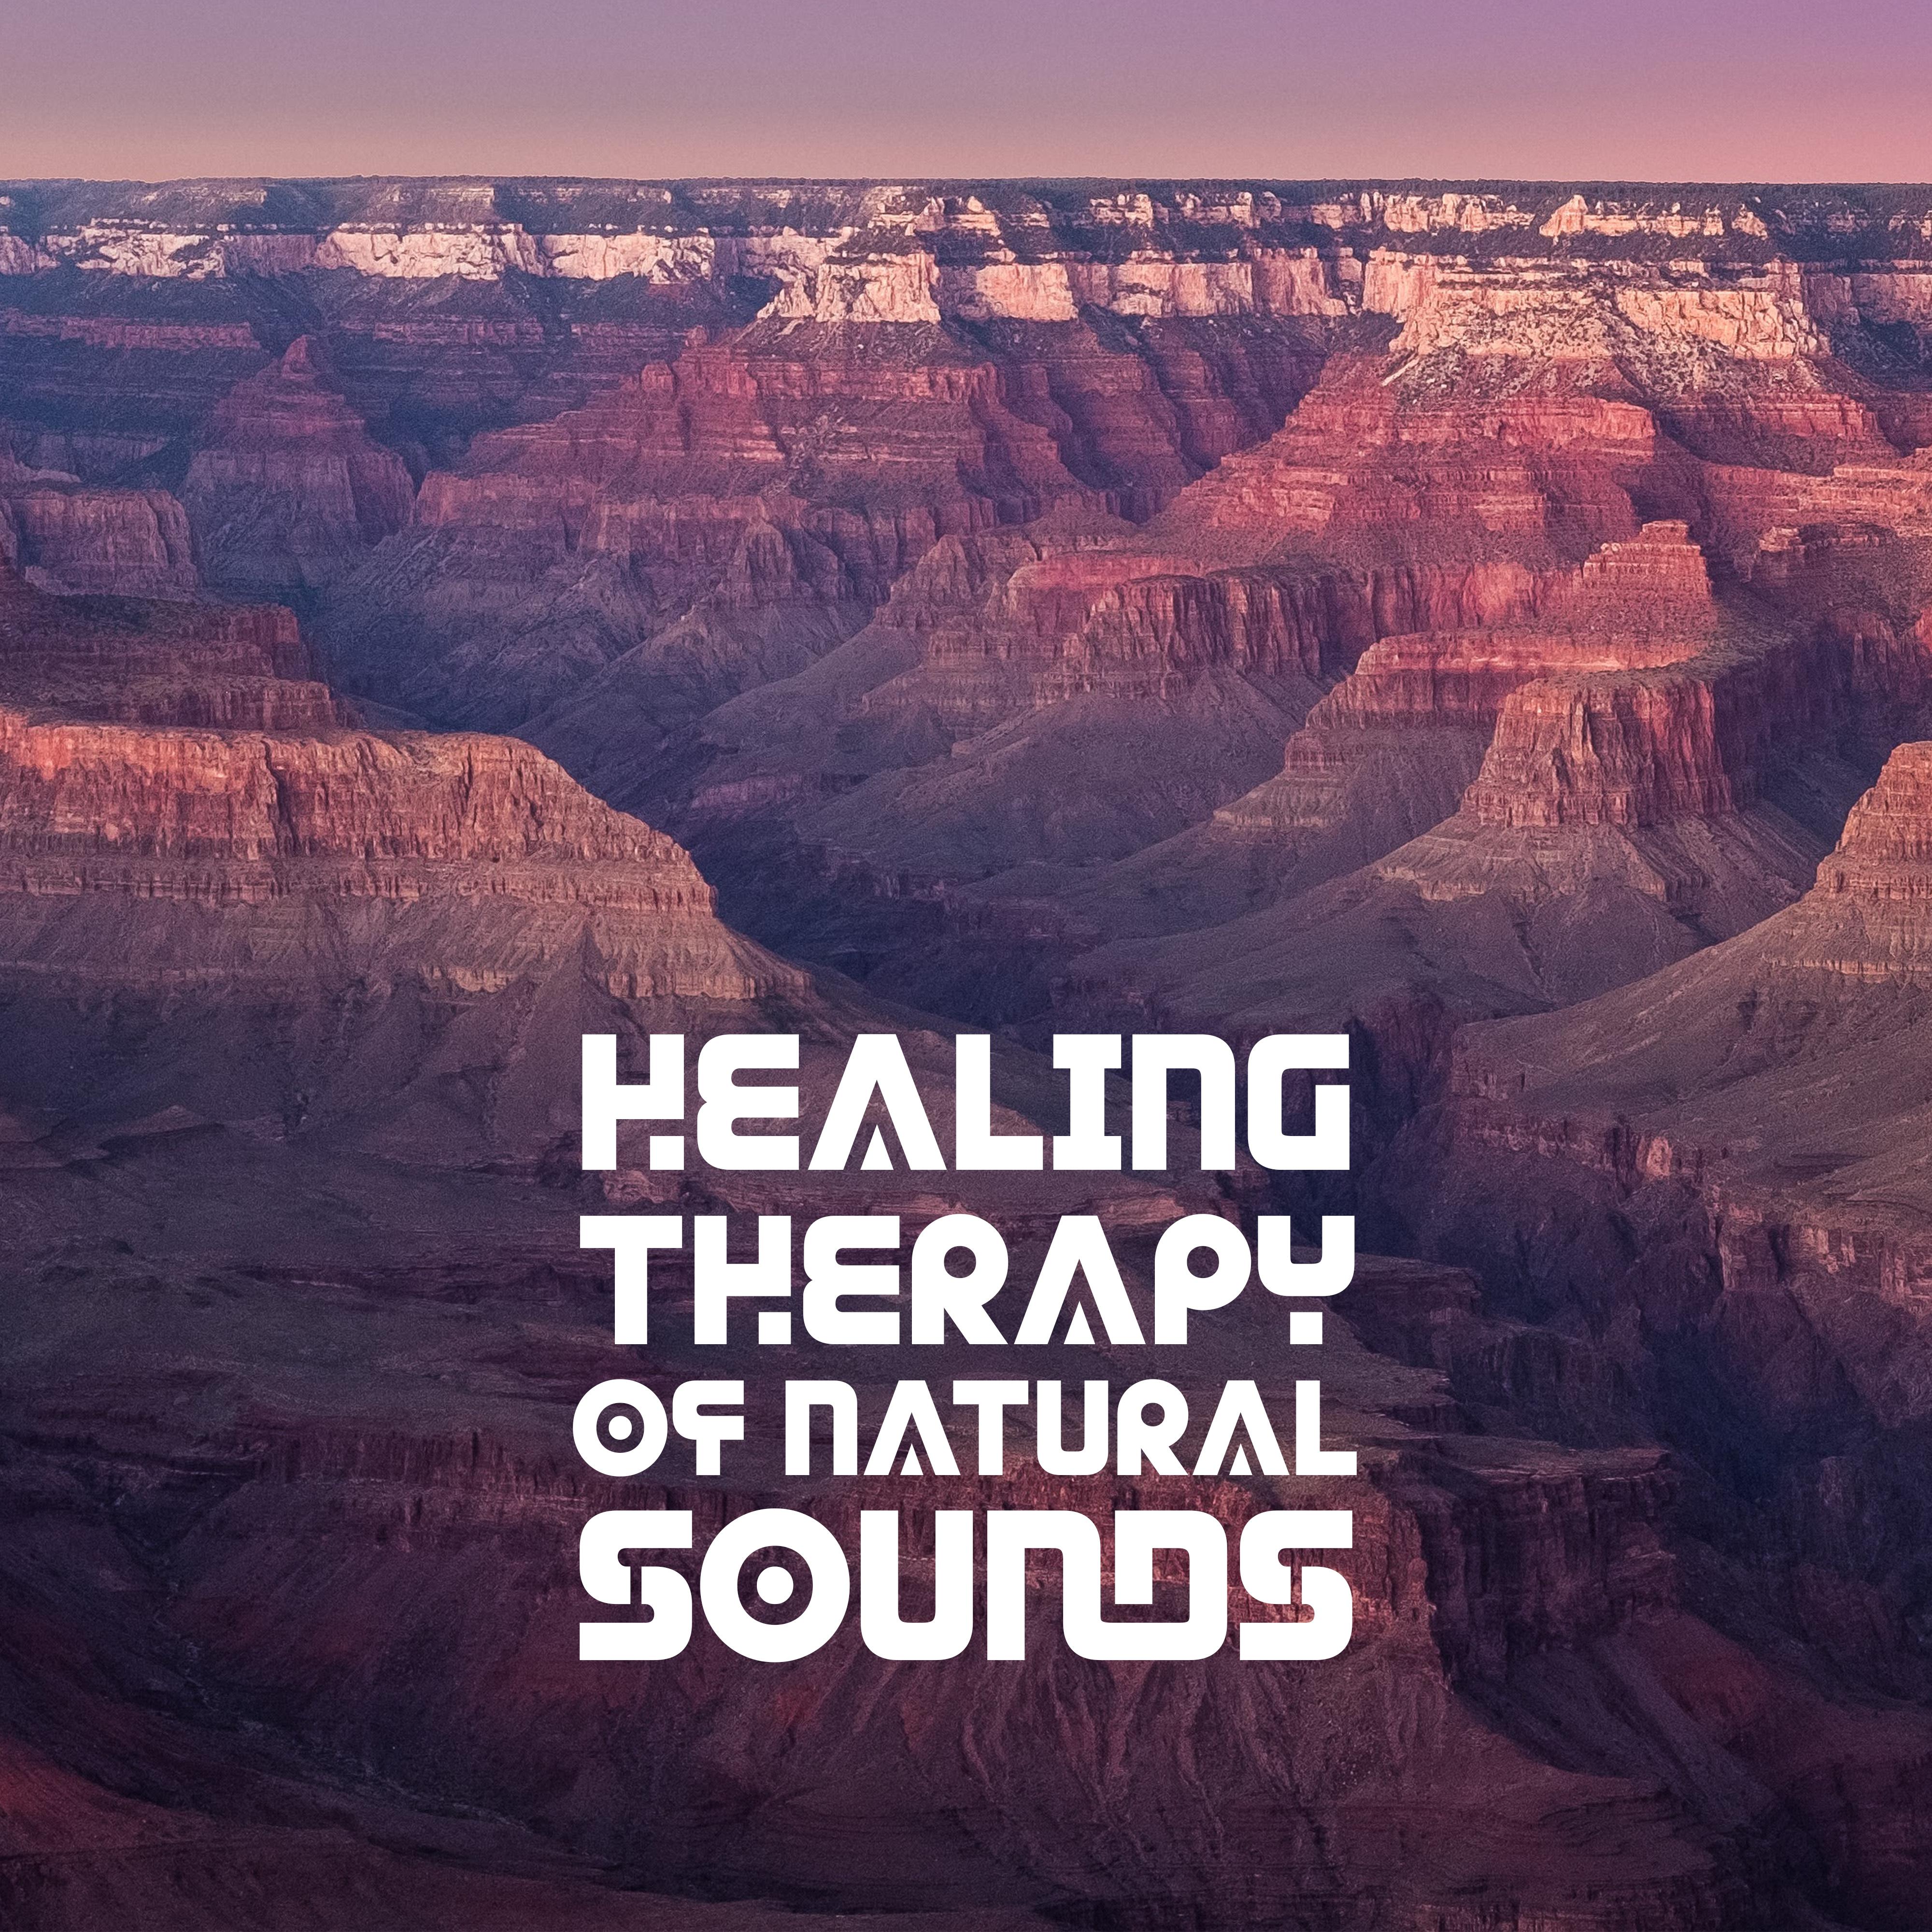 Healing Therapy of Natural Sounds